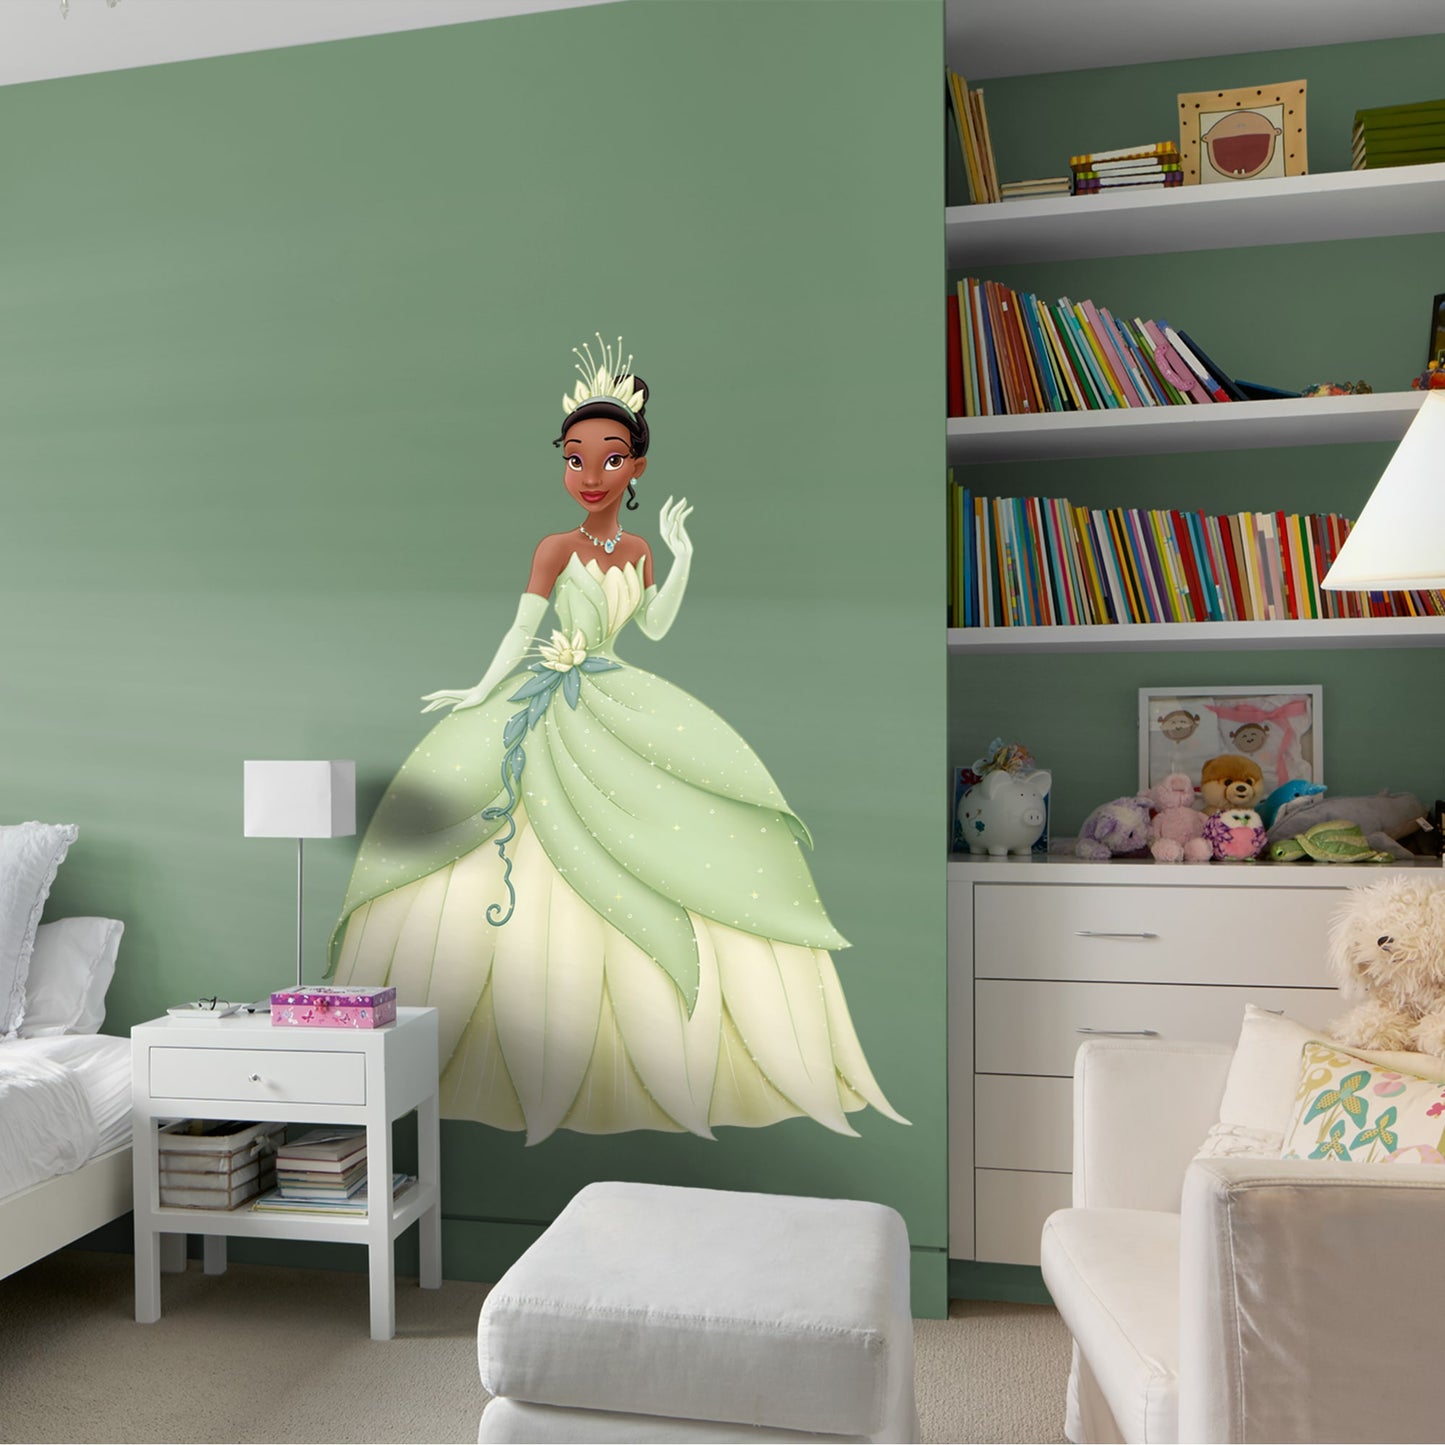 Princess Tiana - Officially Licensed Disney Removable Wall Decal